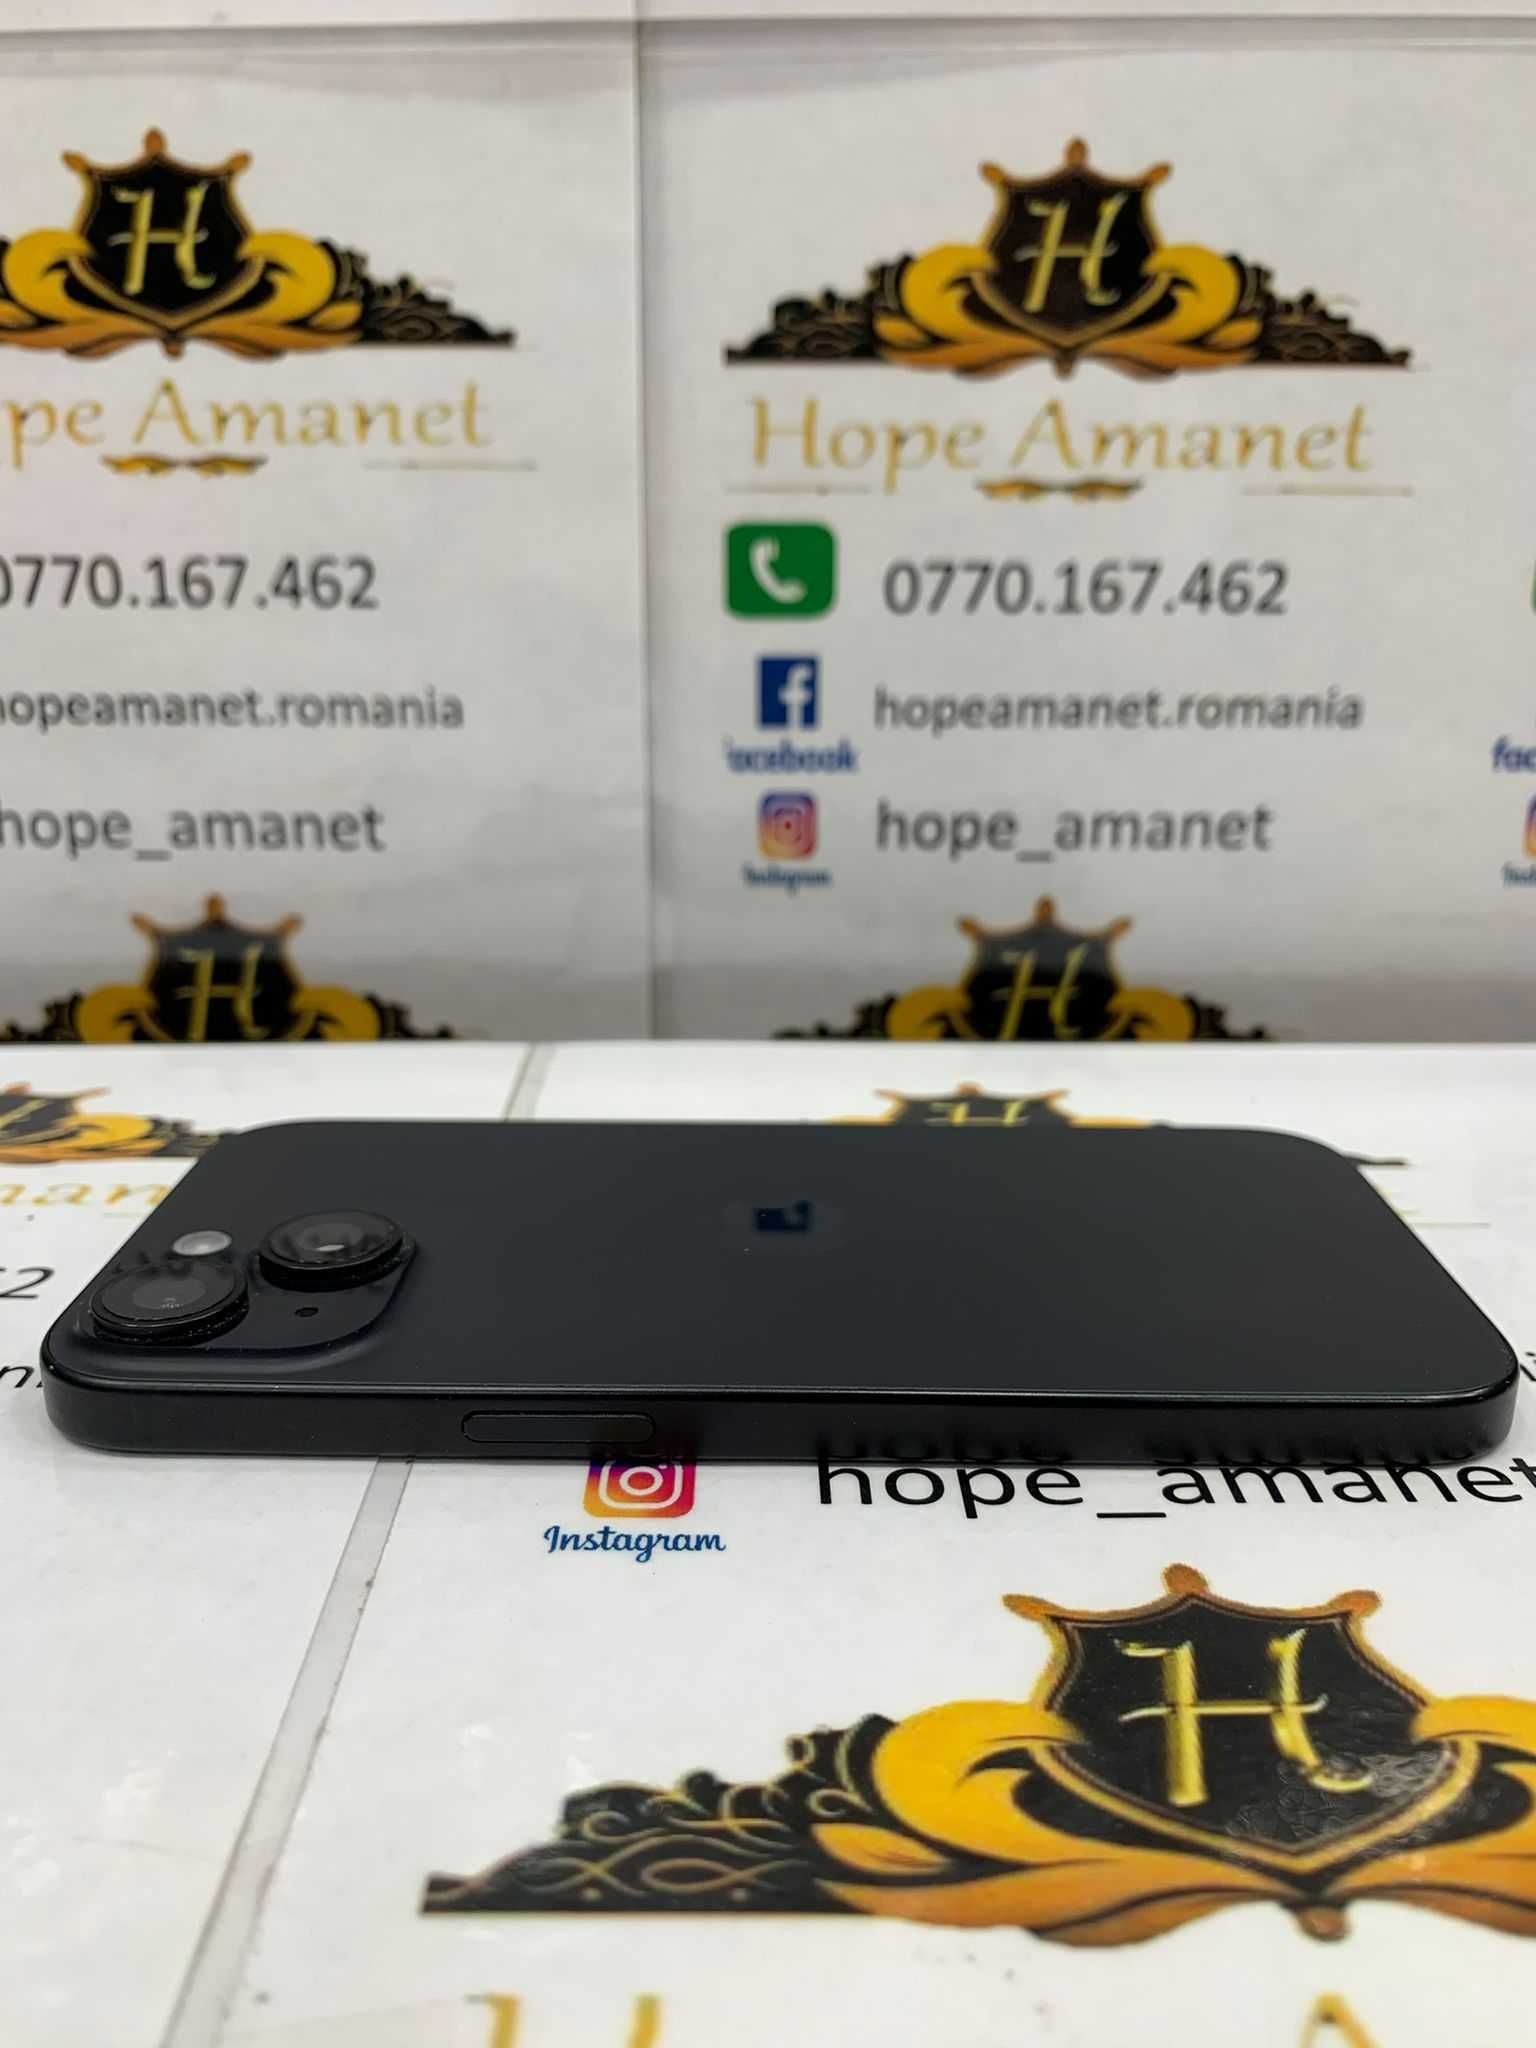 Hope Amanet P12 - Iphone 15 / Stocare 128 Gb / Baterie 100% / Black